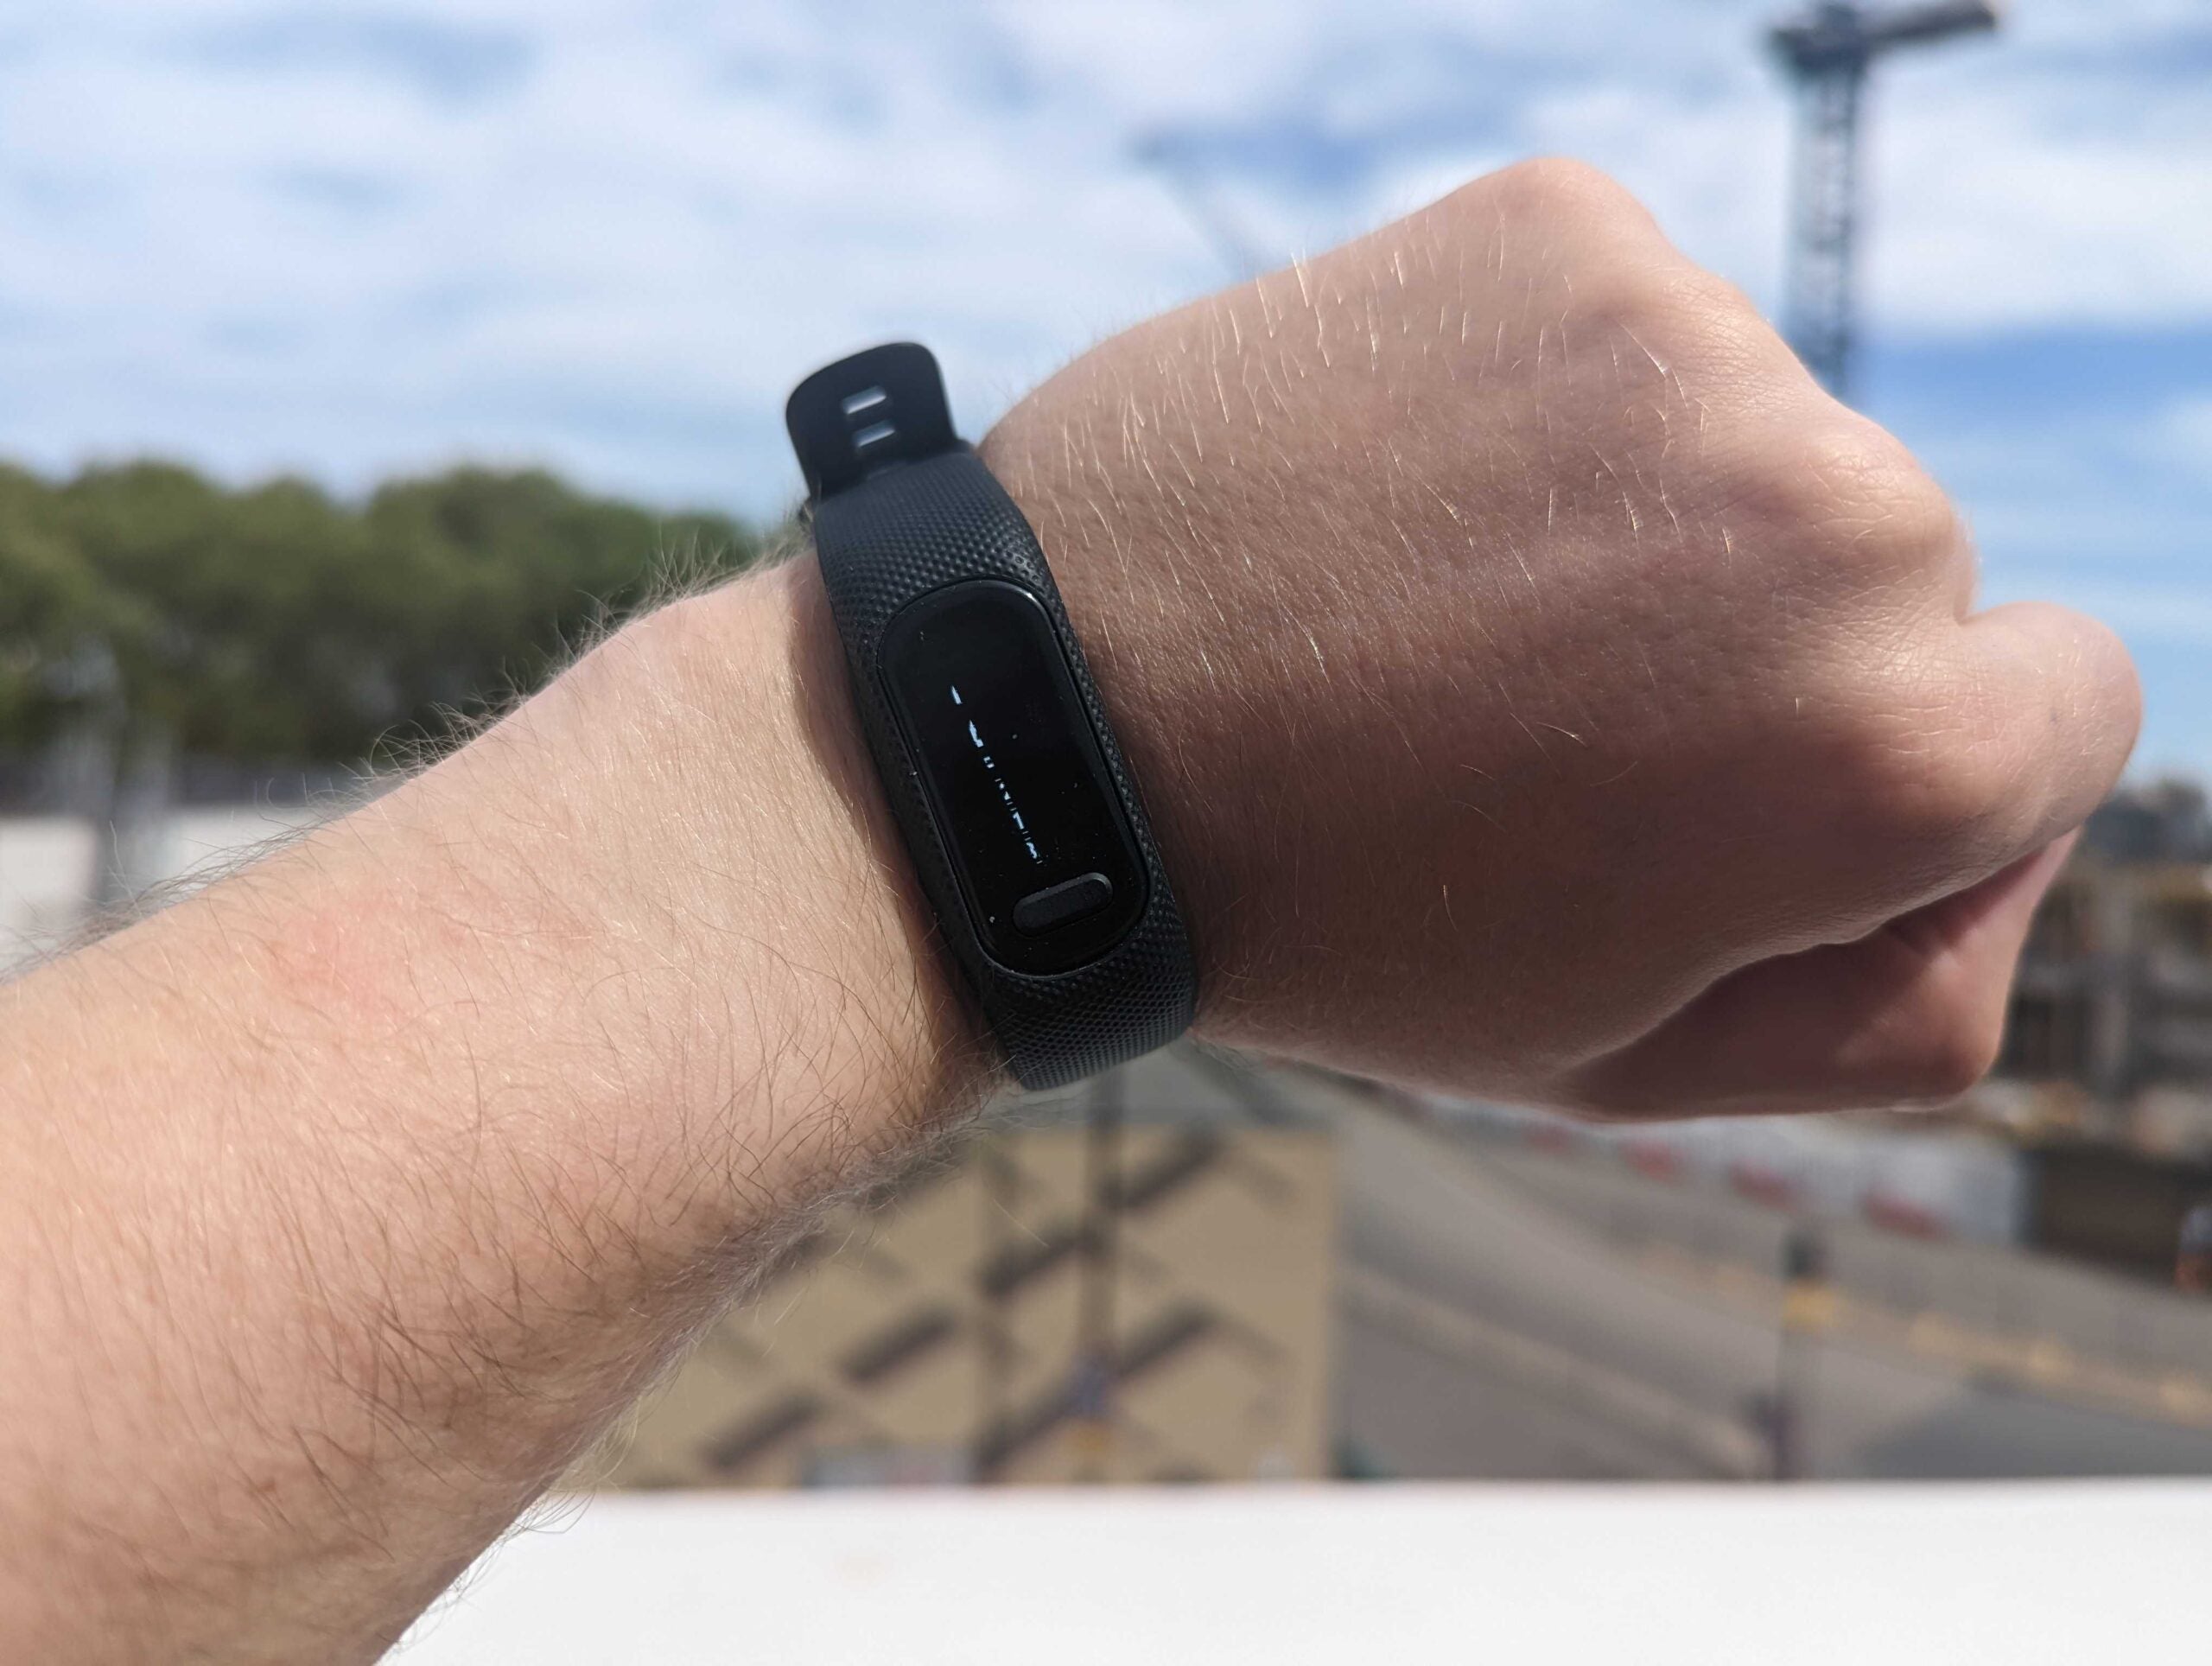 2. Features to Look For in the Best Fitness Trackers